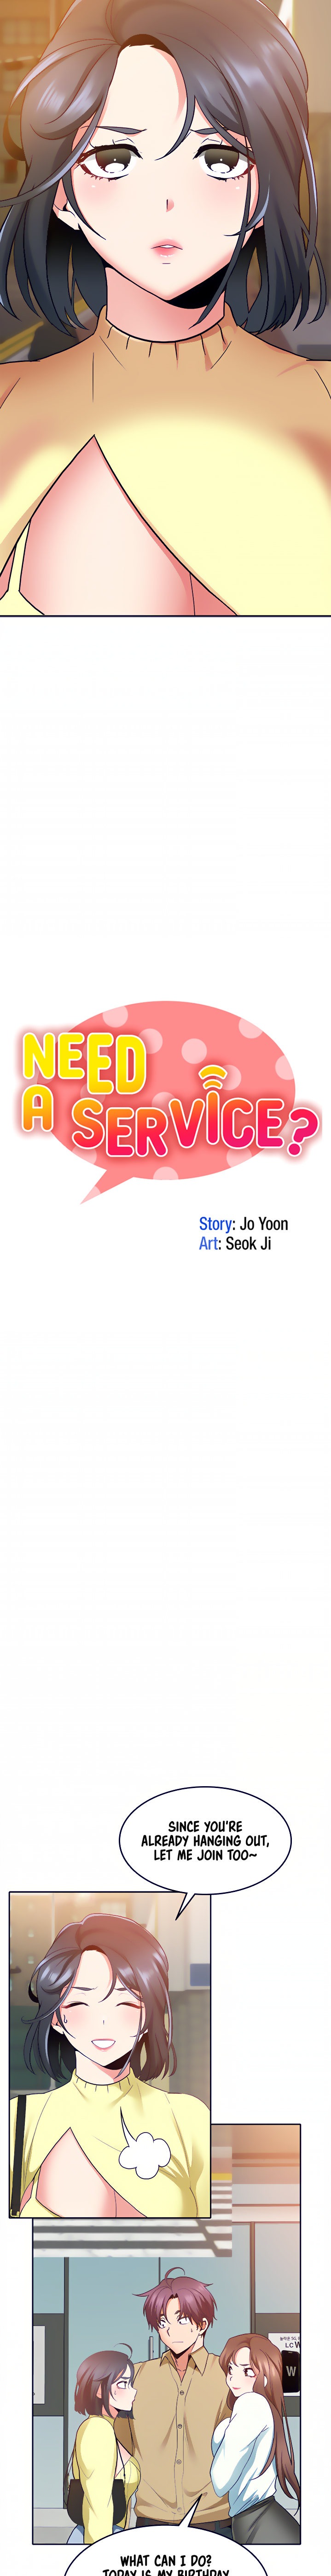 Need A Service? - Chapter 35 Page 2